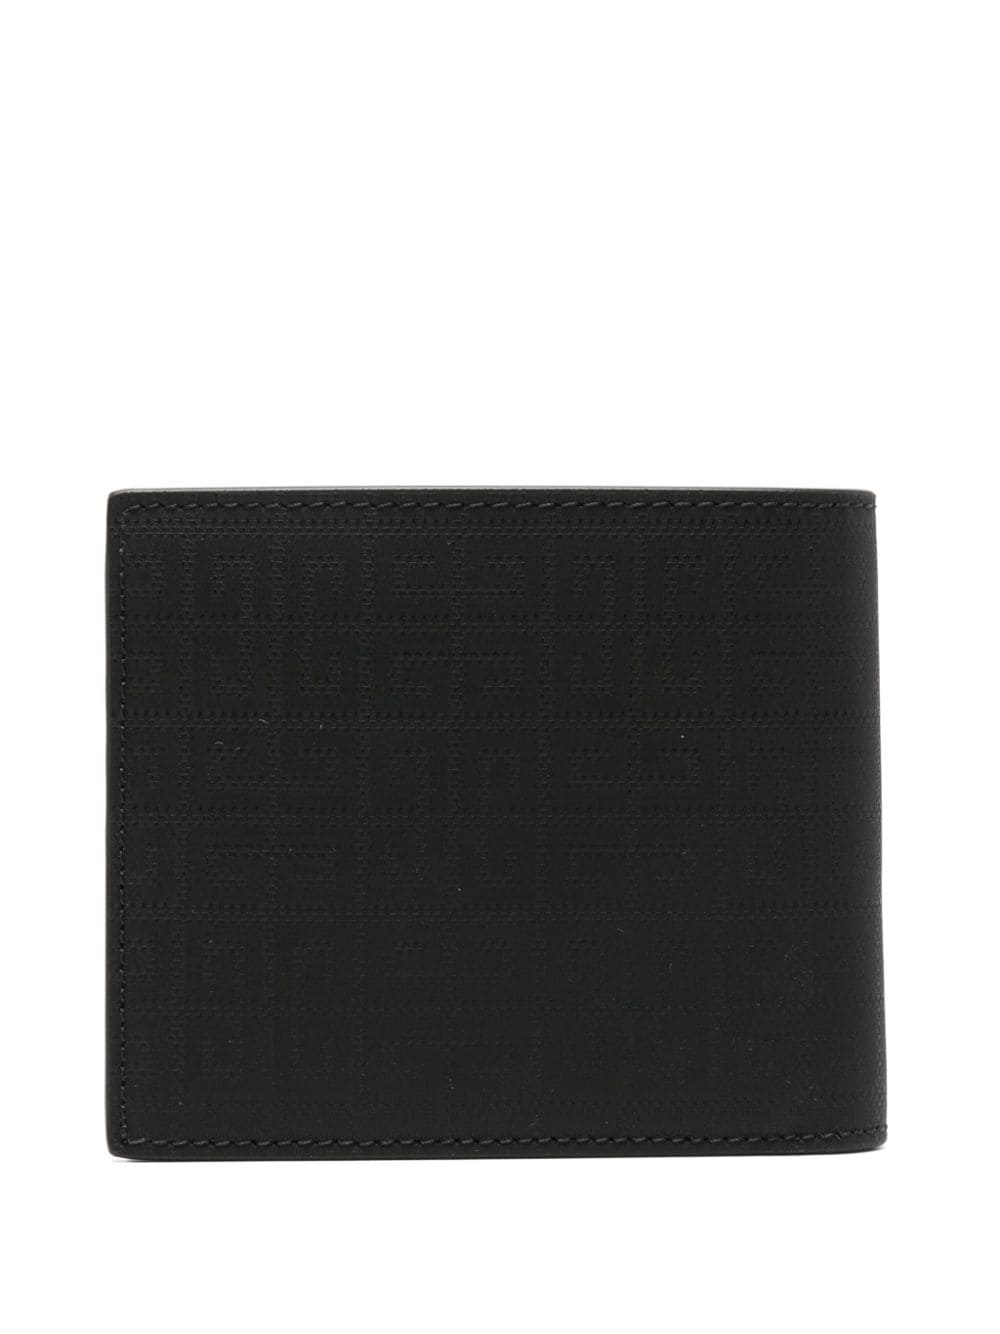 Givenchy GIVENCHY- Billfold Leather Wallet